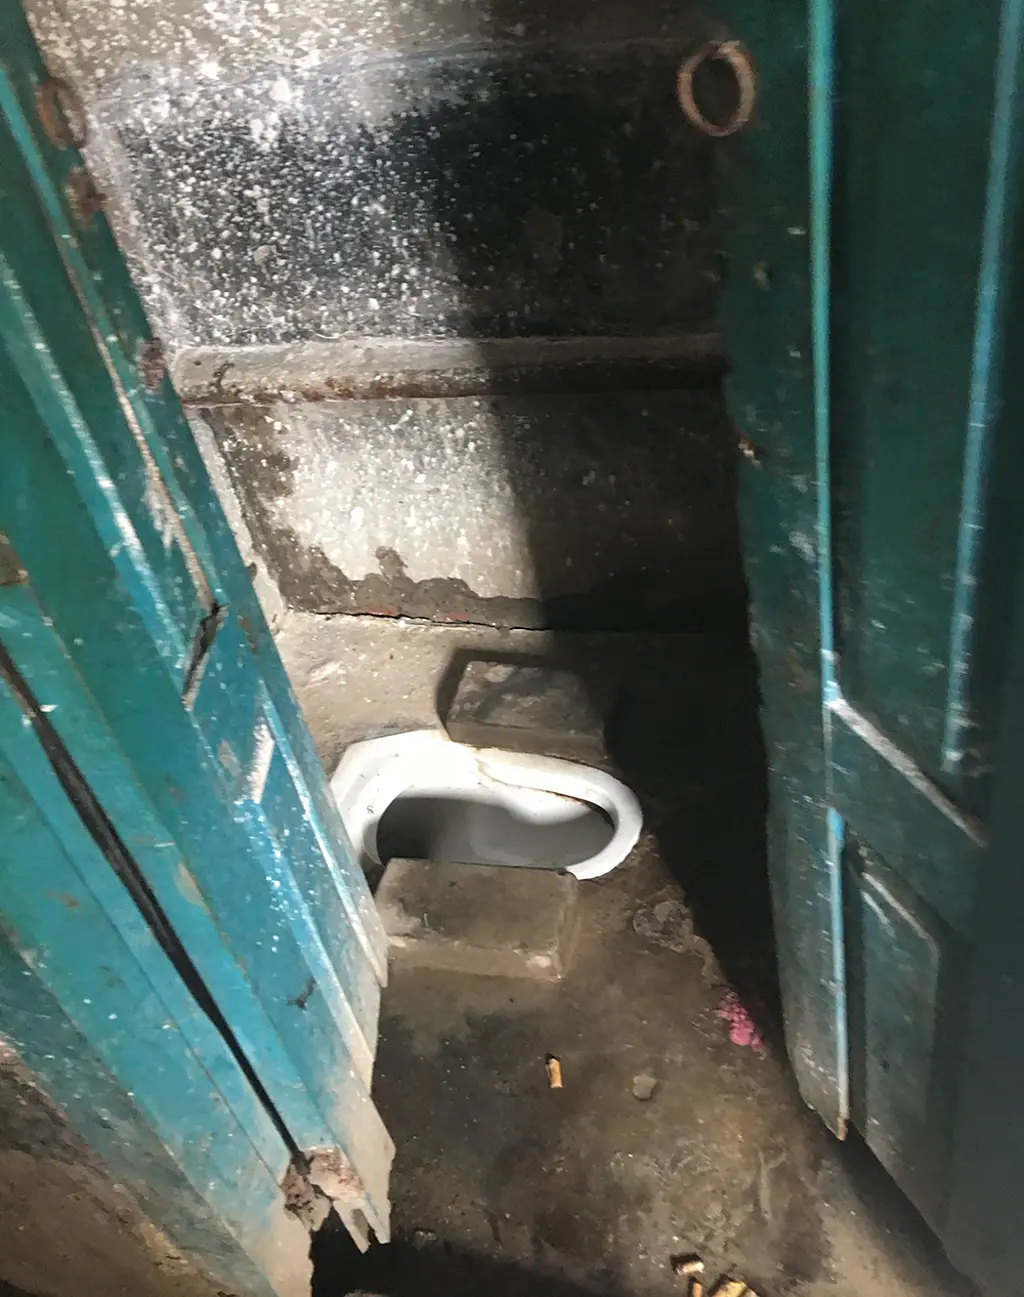 An example of a poorly designed toilet from Bangladesh.